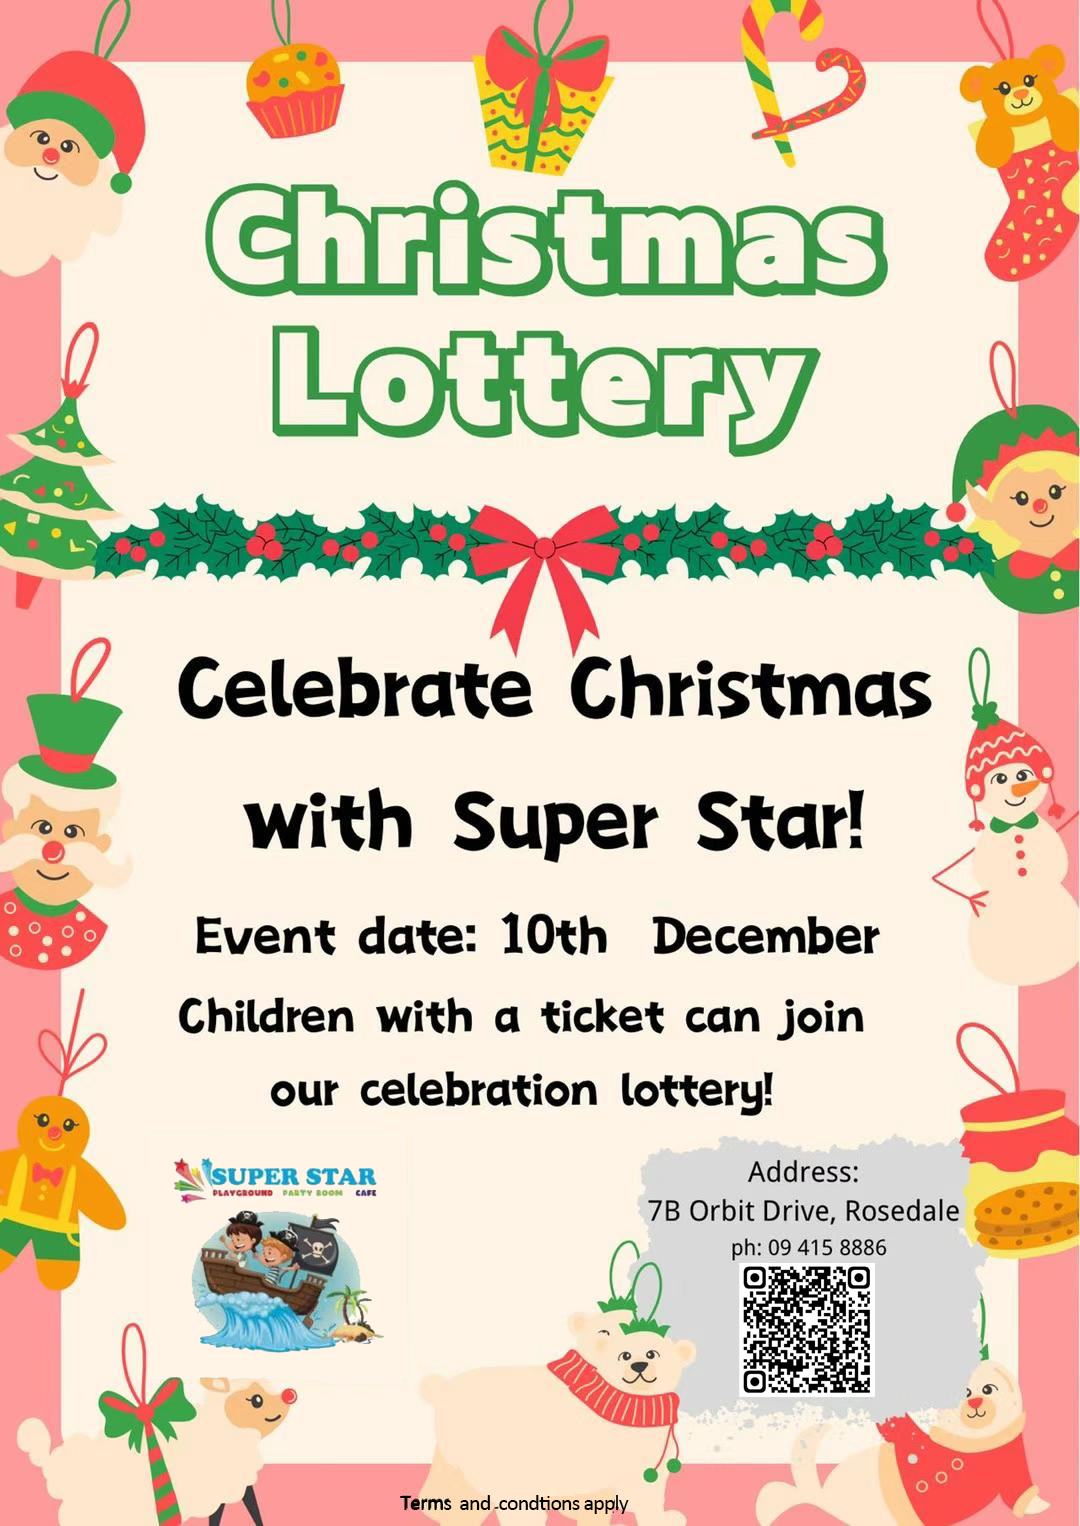 Christmas event indoor playground lottery